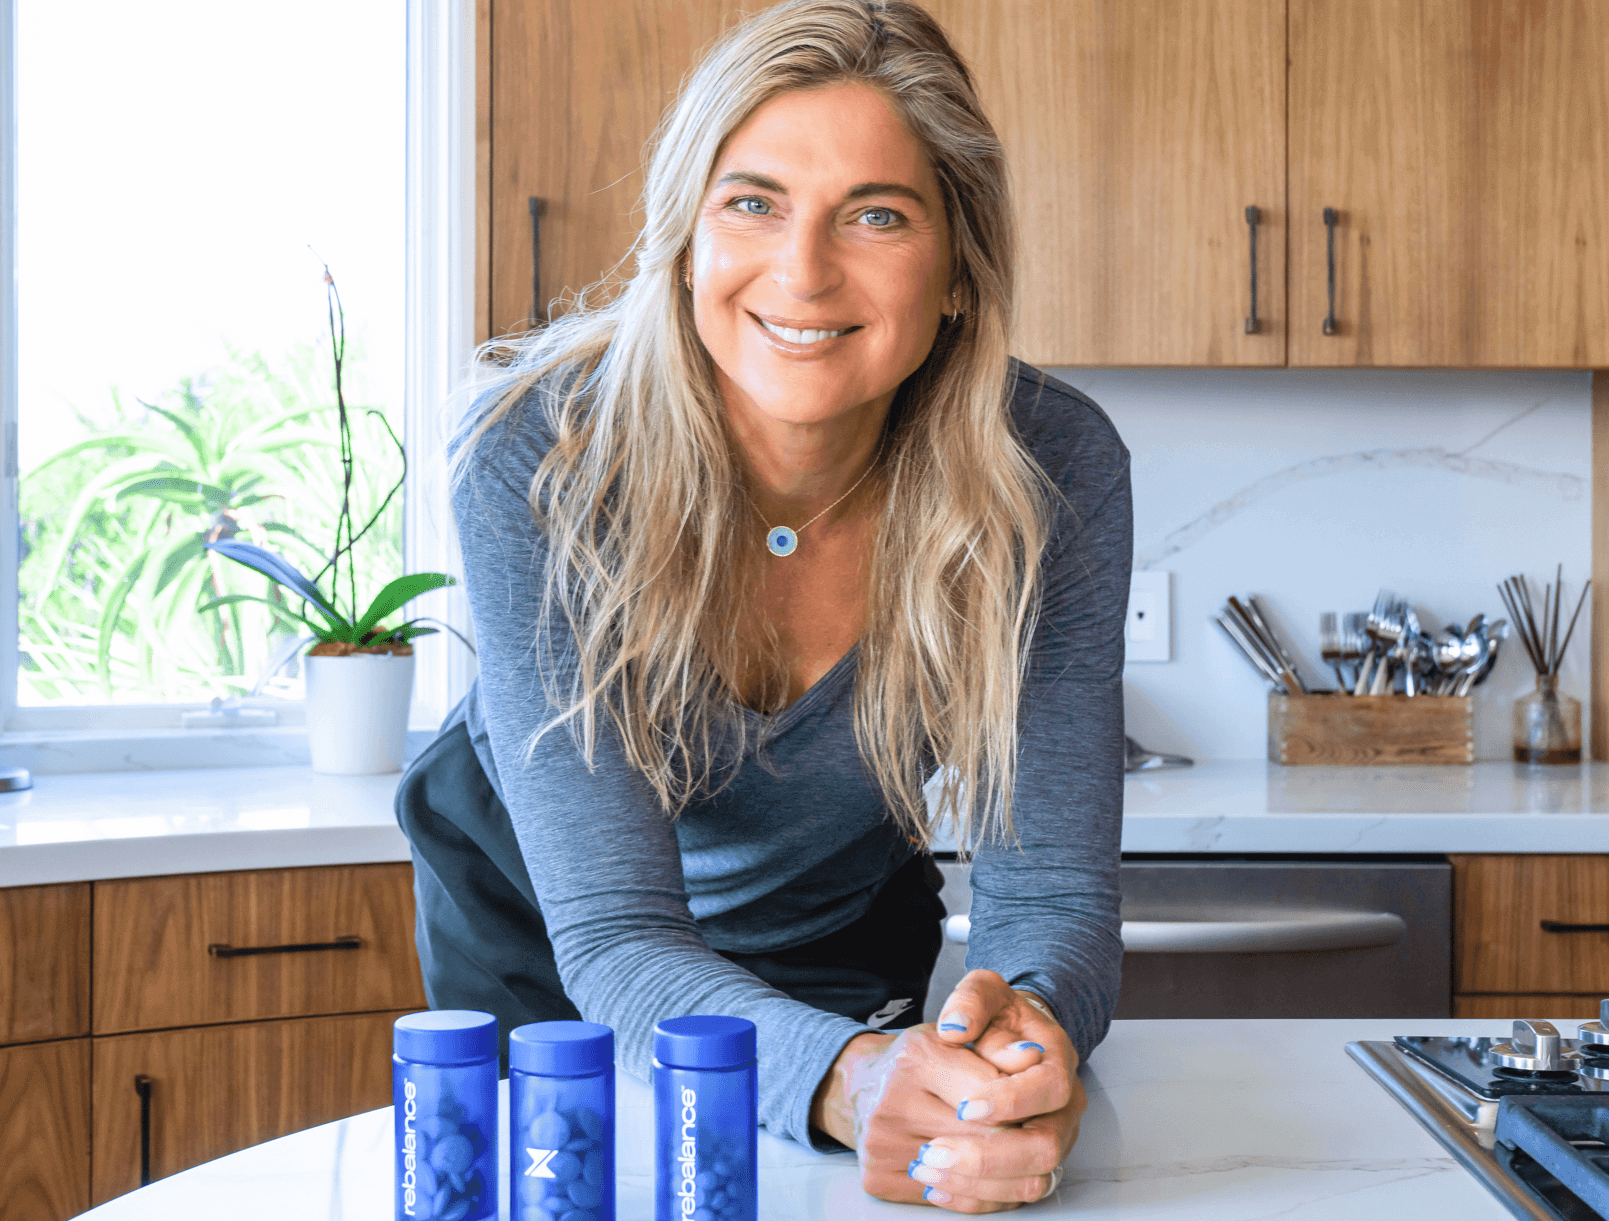 Rebalance Health Partners with Former Professional Volleyball Athlete, Fitness Guru, and New York Times Best-Selling Author - Gabrielle Reece - Rebalance Health, Inc.